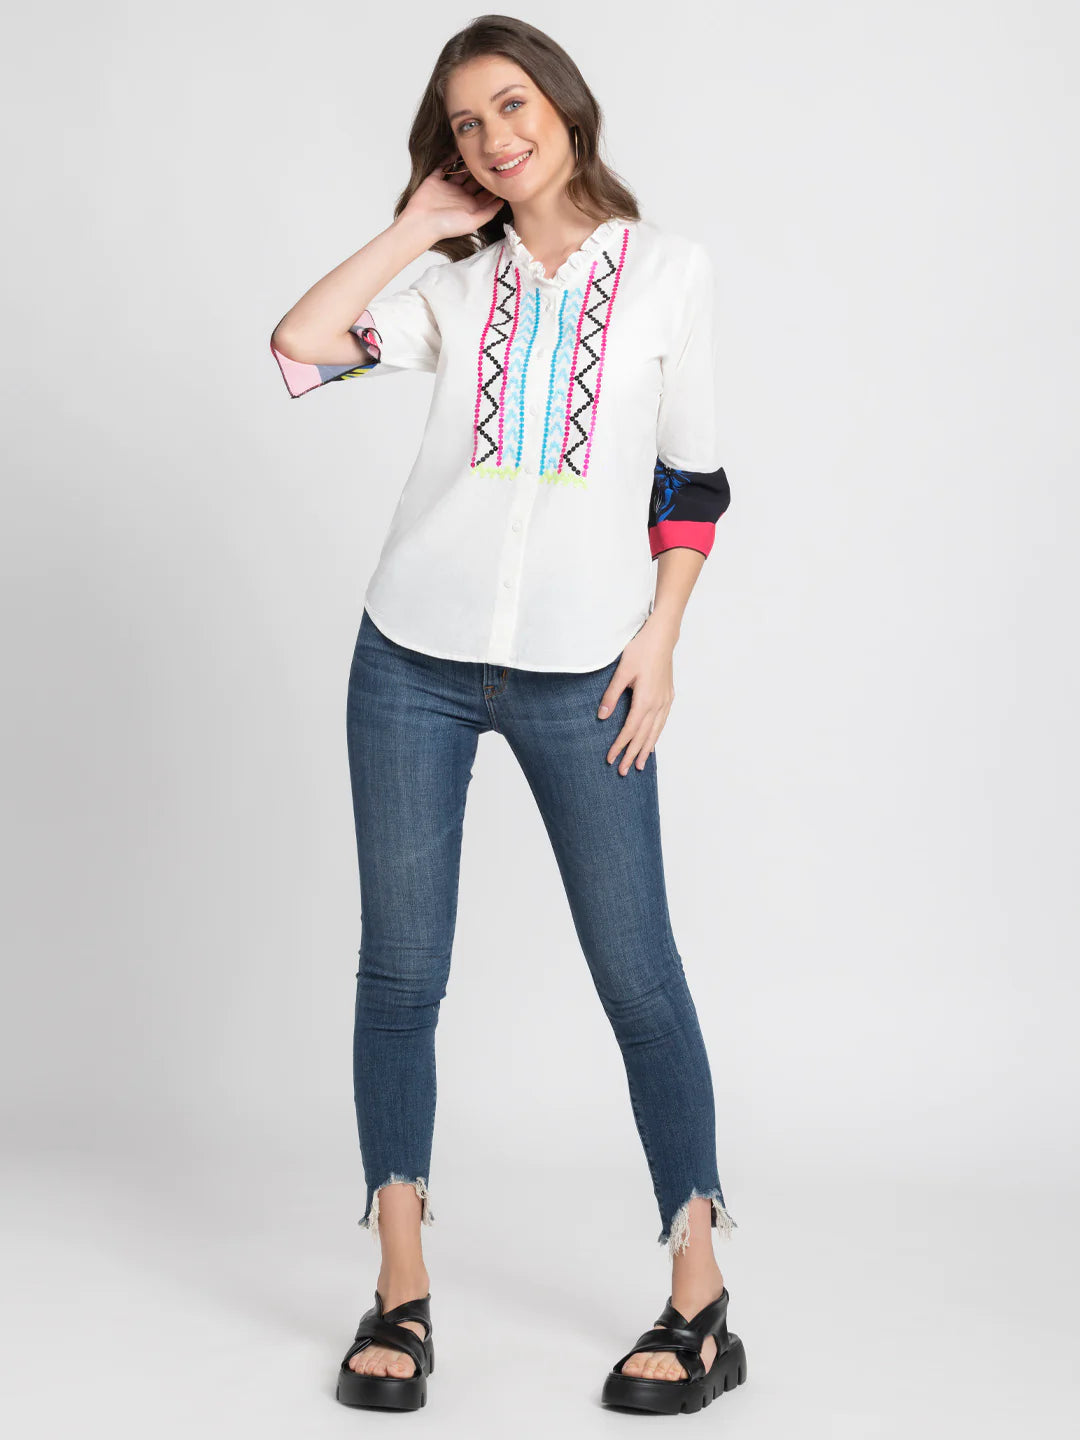 White Embroidered Shirt | Chic White Embroidered Shirt